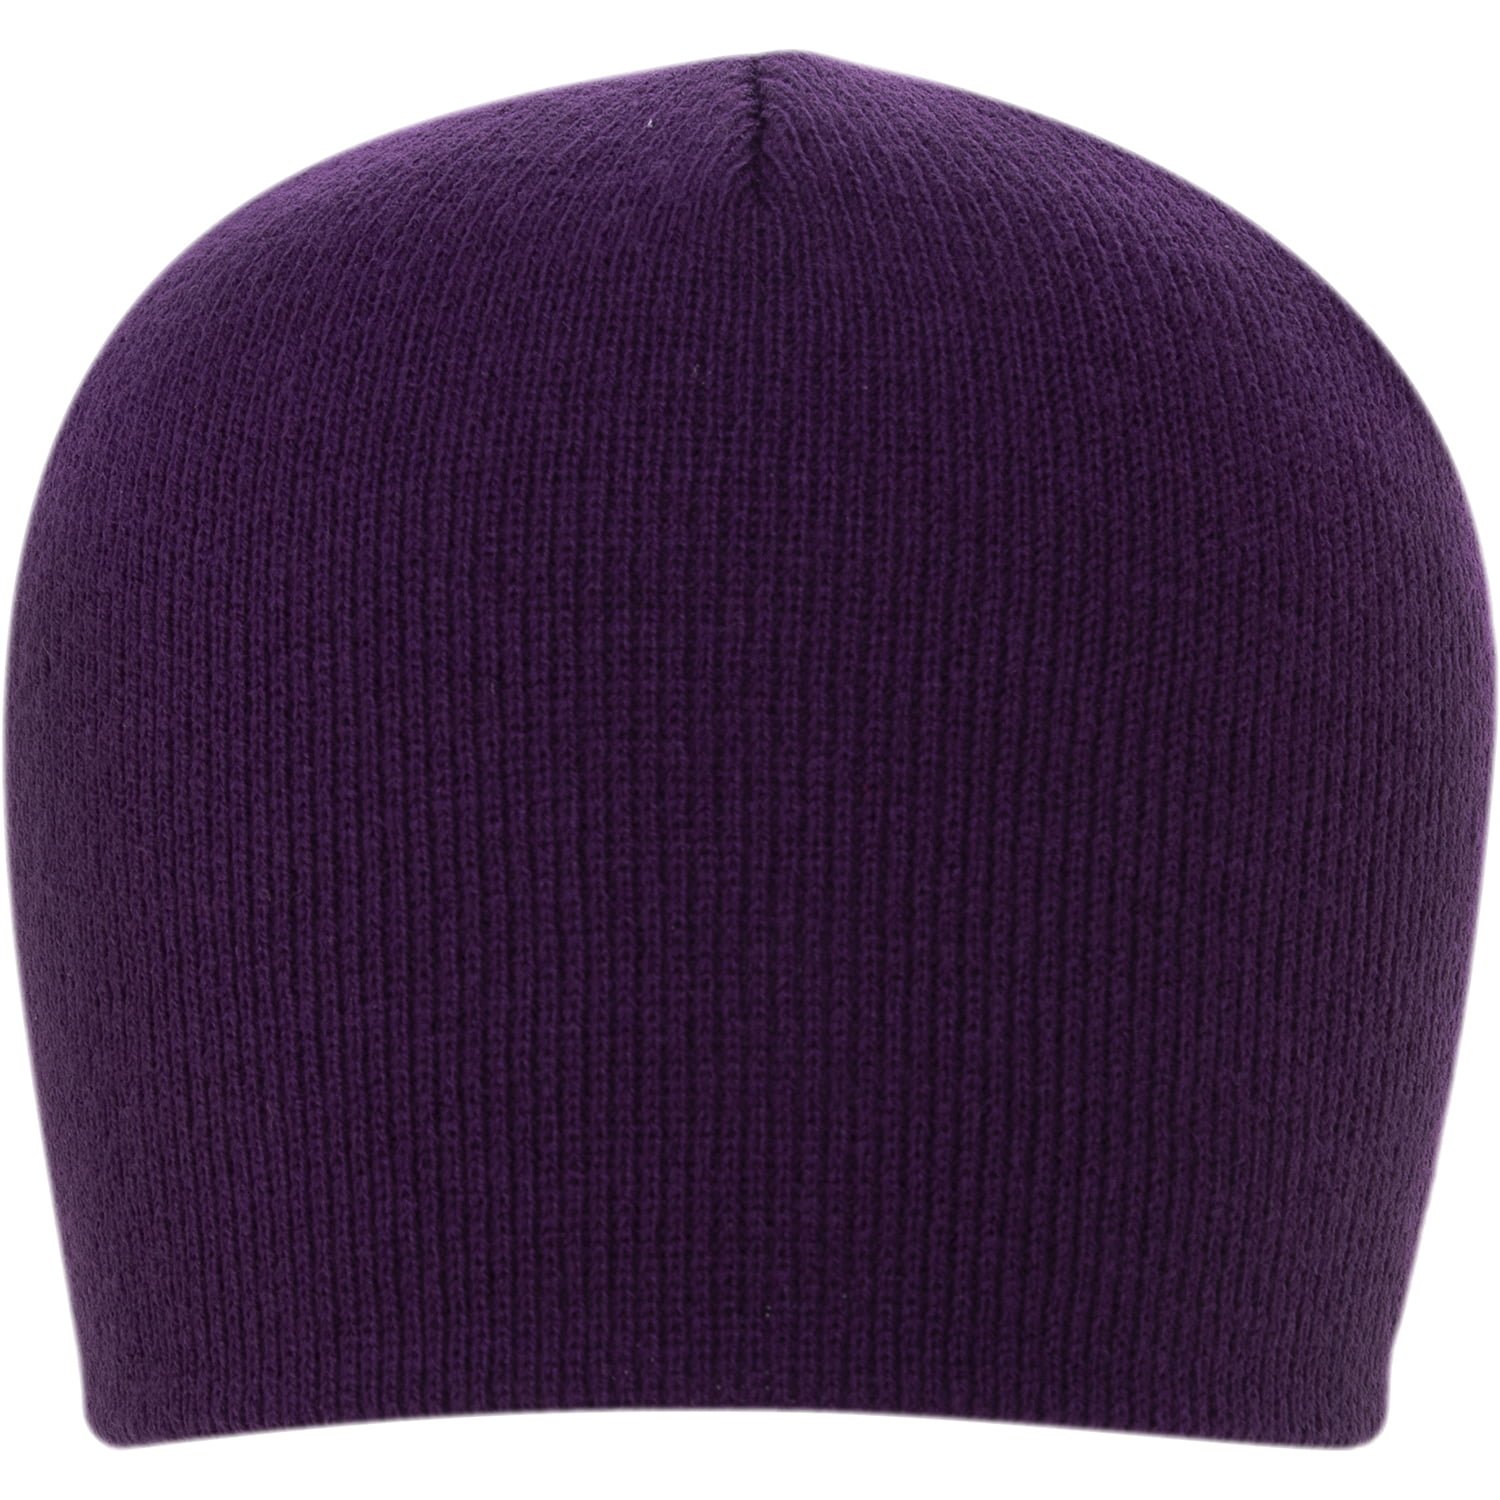 12pcs Solid Purple Beanie Winter Knit Hats - Made in USA - Dozen Packed